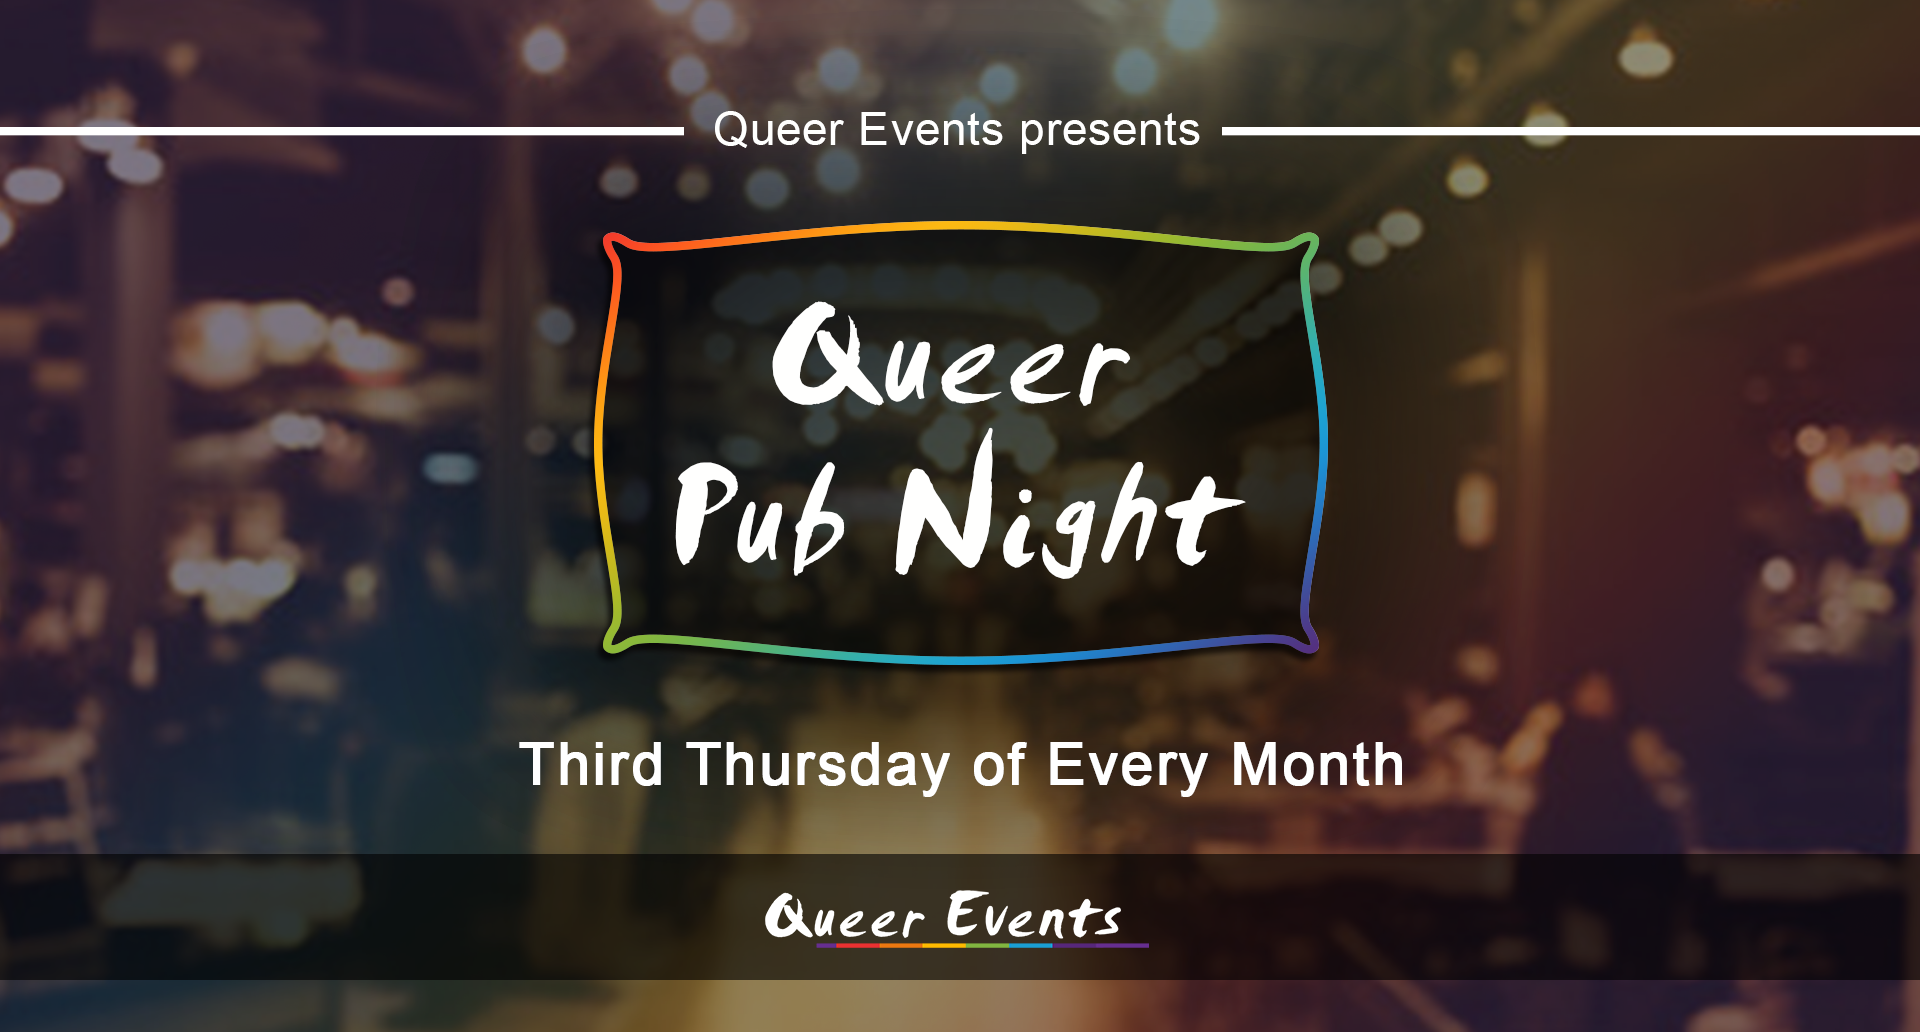 queer events presents monthly queer pub night